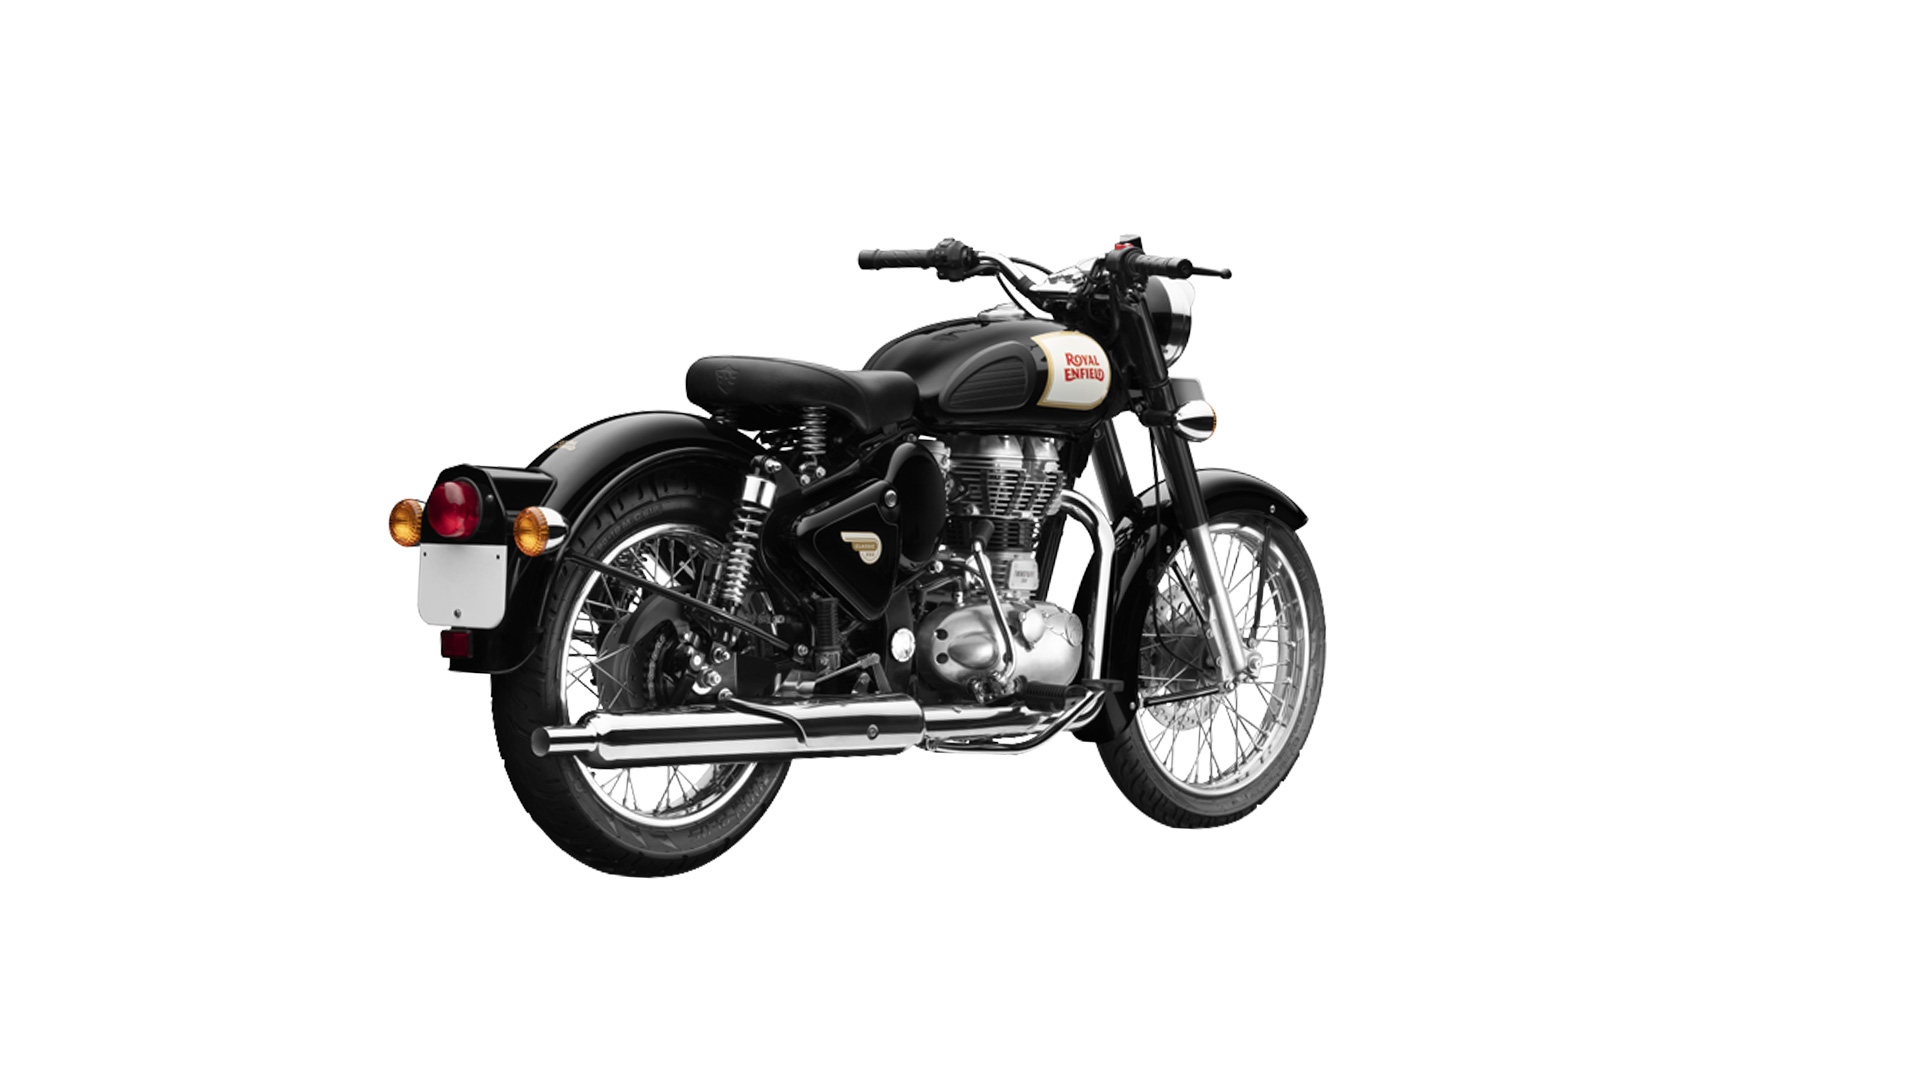 Royal Enfield Classic 350 2019 ABS Bike Photos - Overdrive